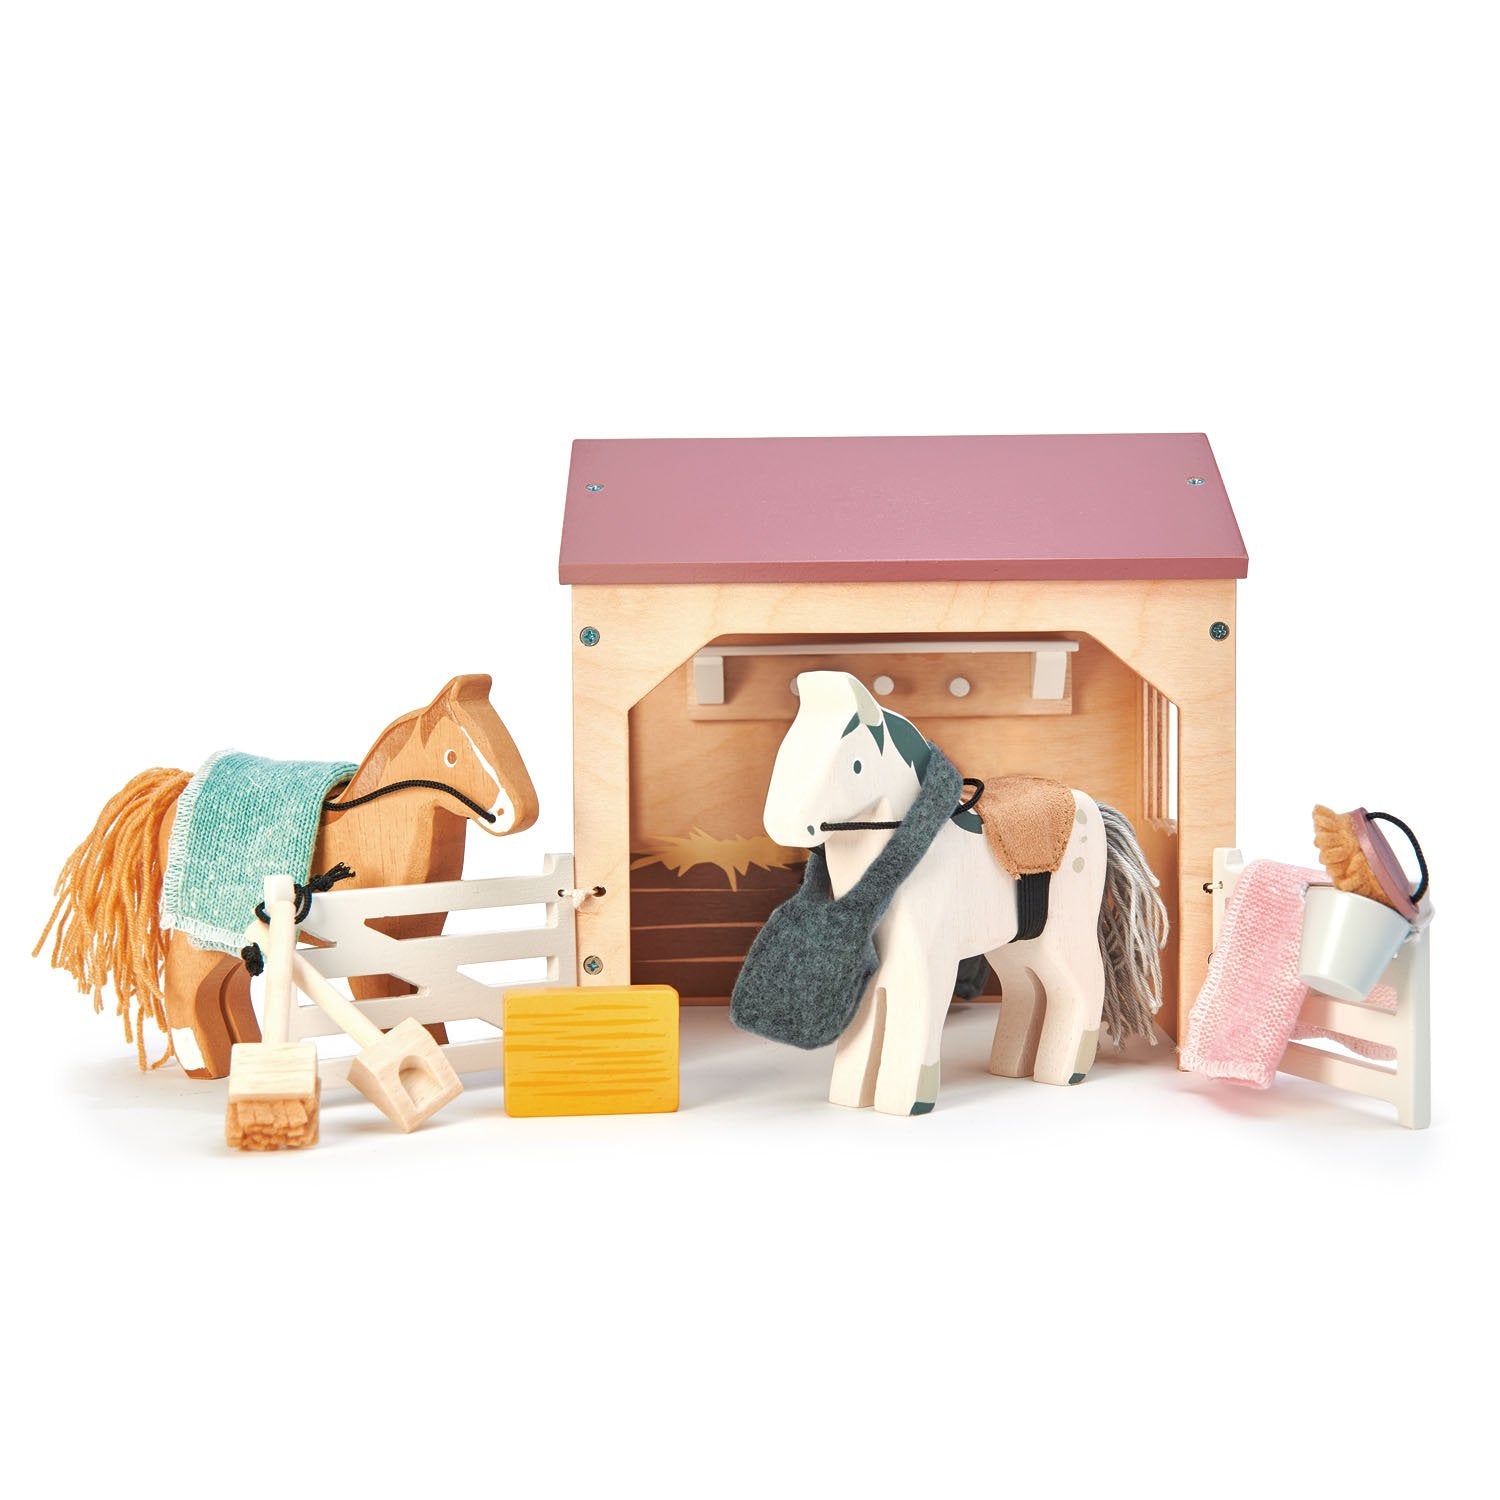 THE STABLES WOODEN TOY SET